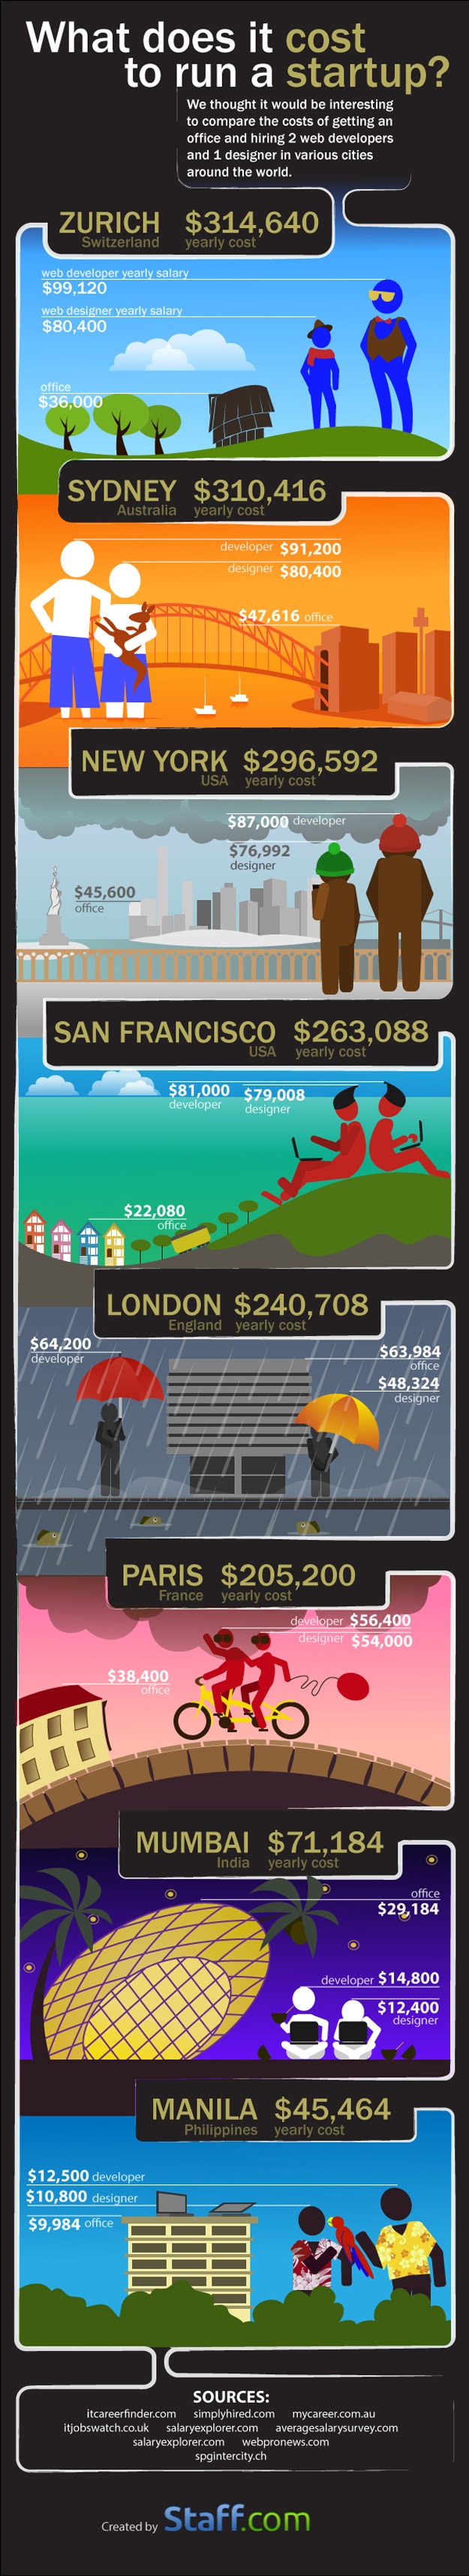 How Much Does It Cost To Run A Startup Around The World? [Infographic]